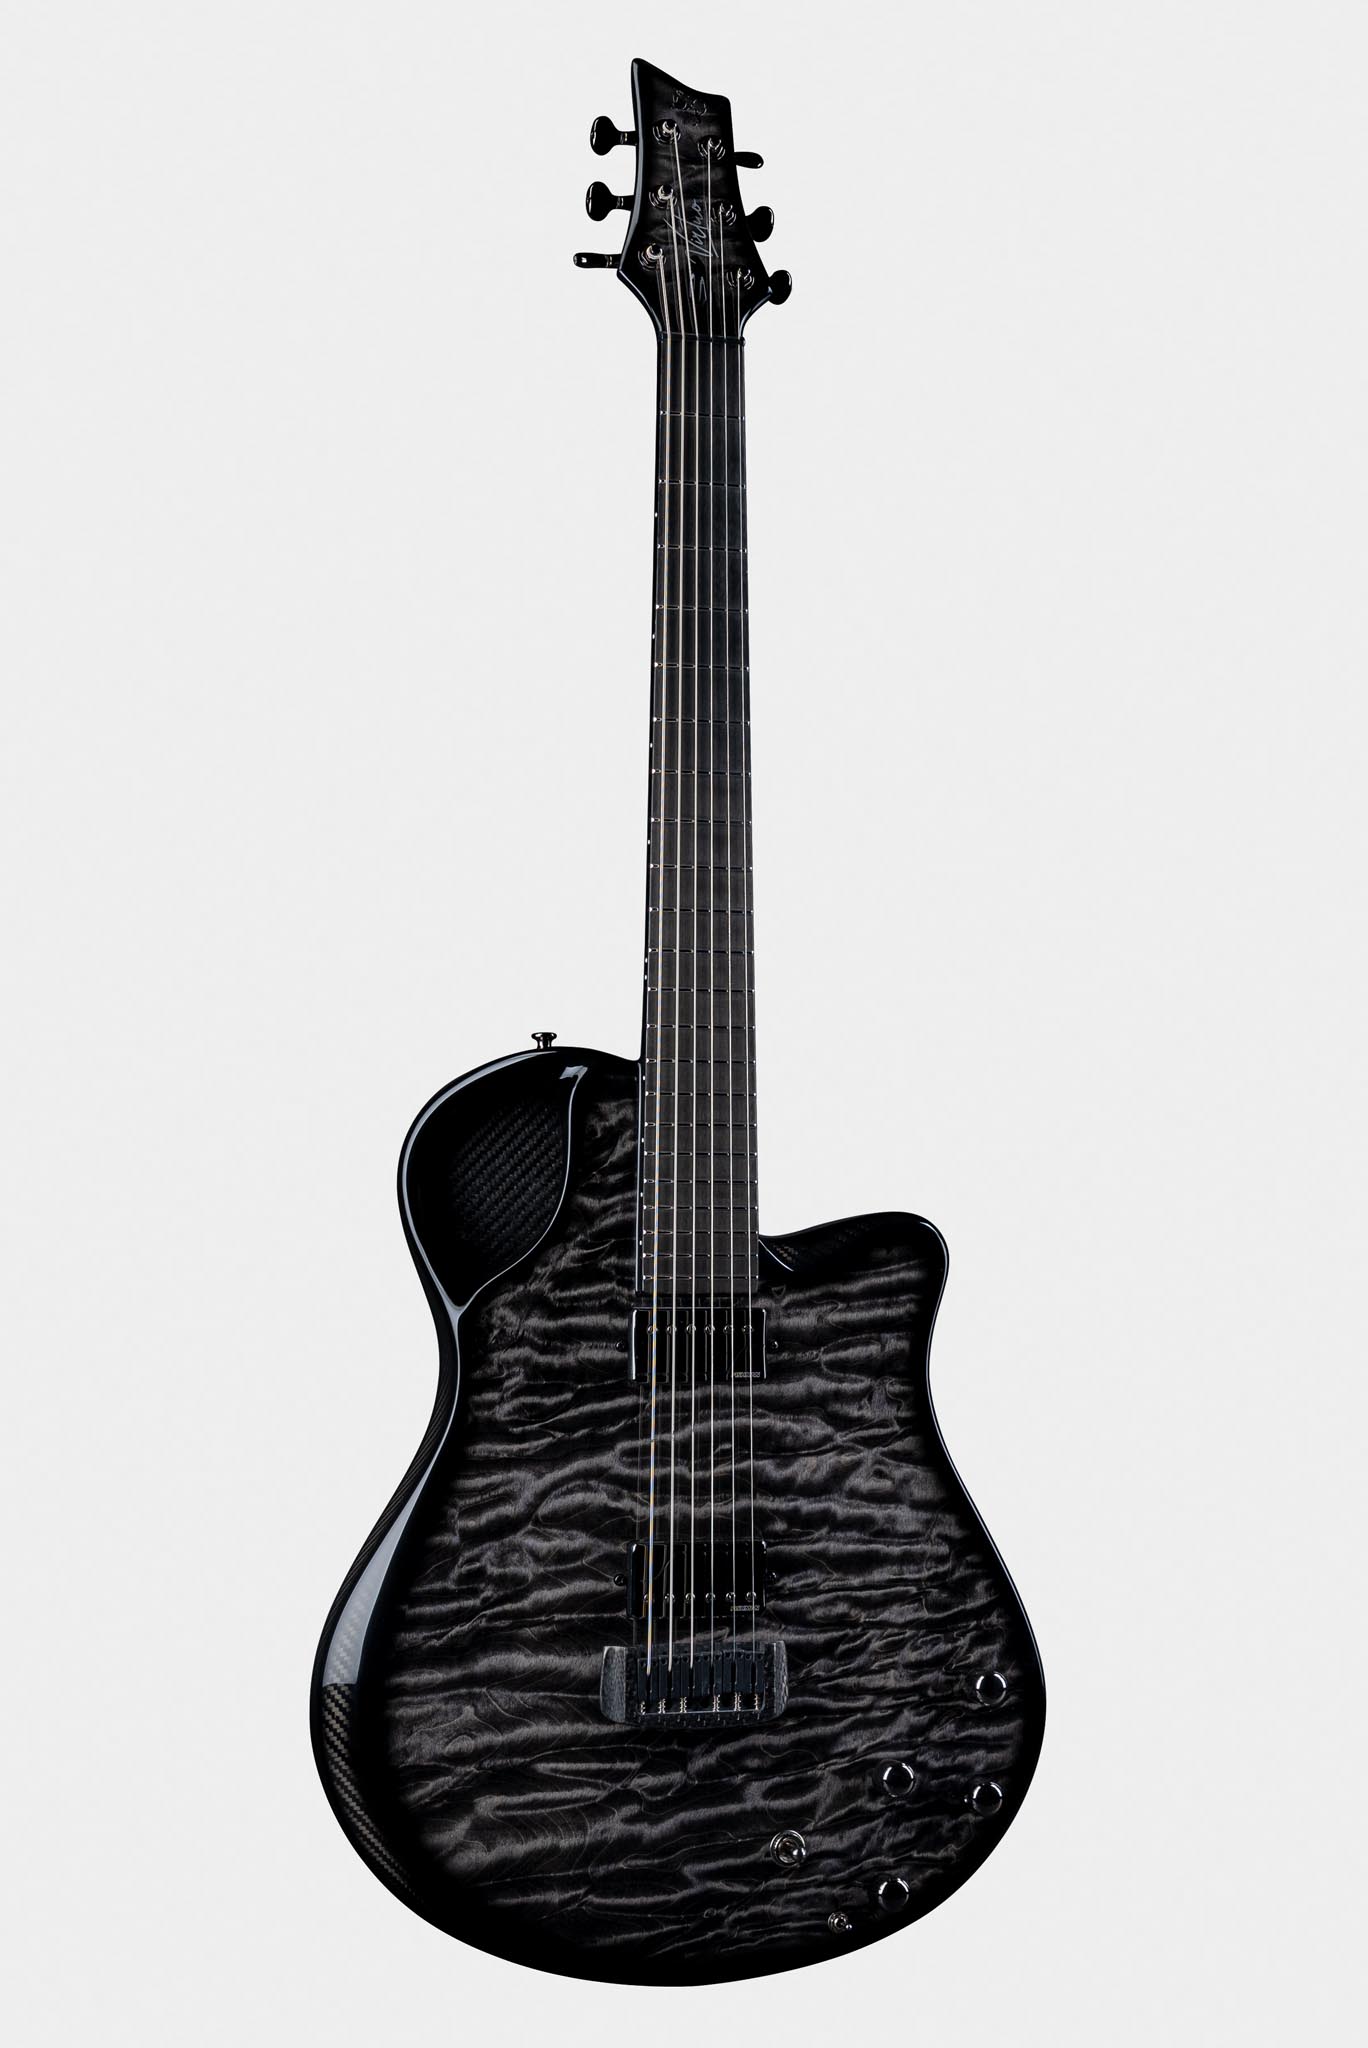 Black Emerald Virtuo Guitar with Unique Marble Finish